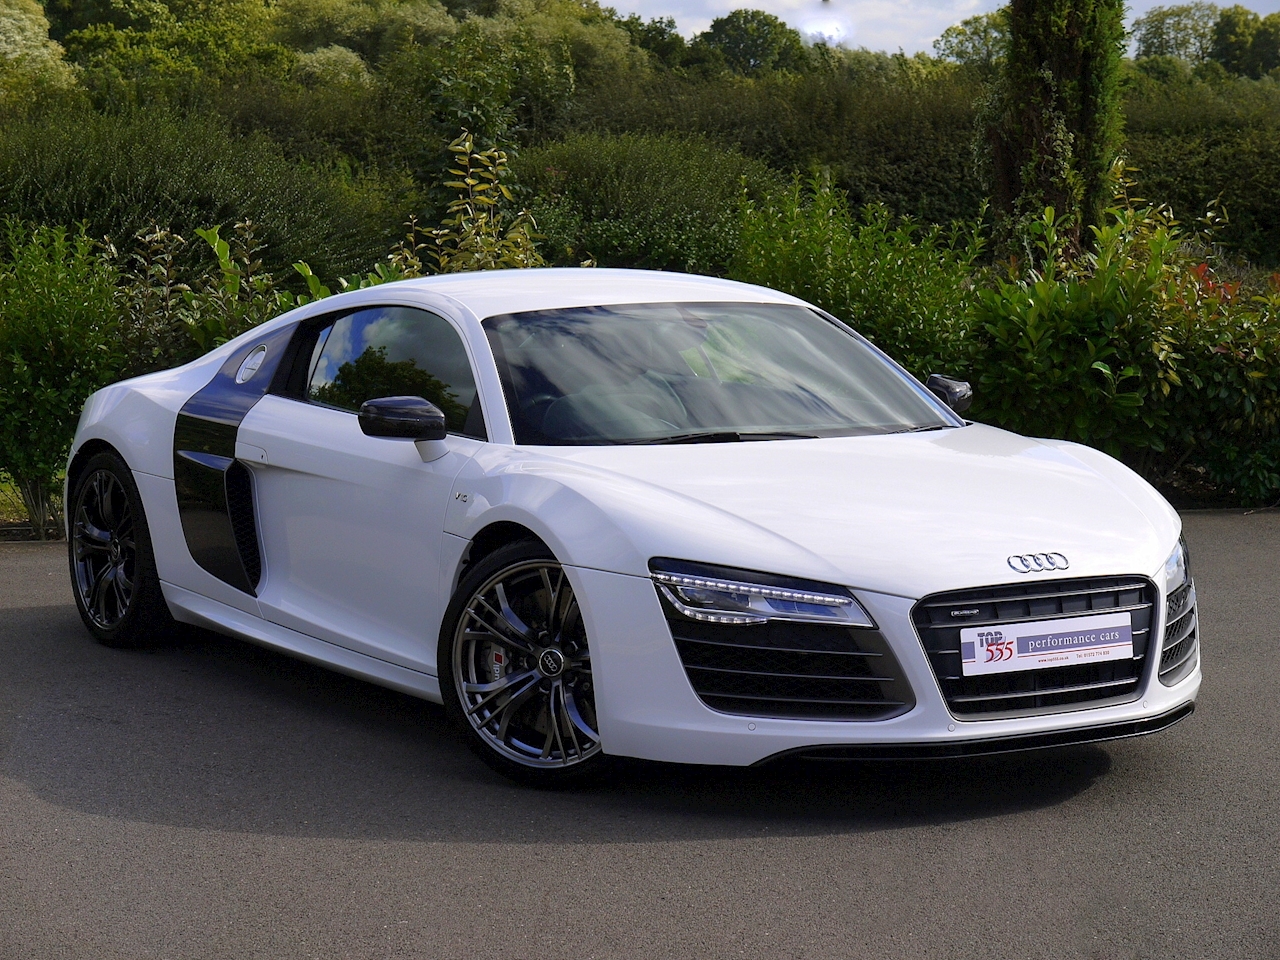 The Ultimate Supercar: Experience The Power Of The 2013 Audi R8 V10 Plus